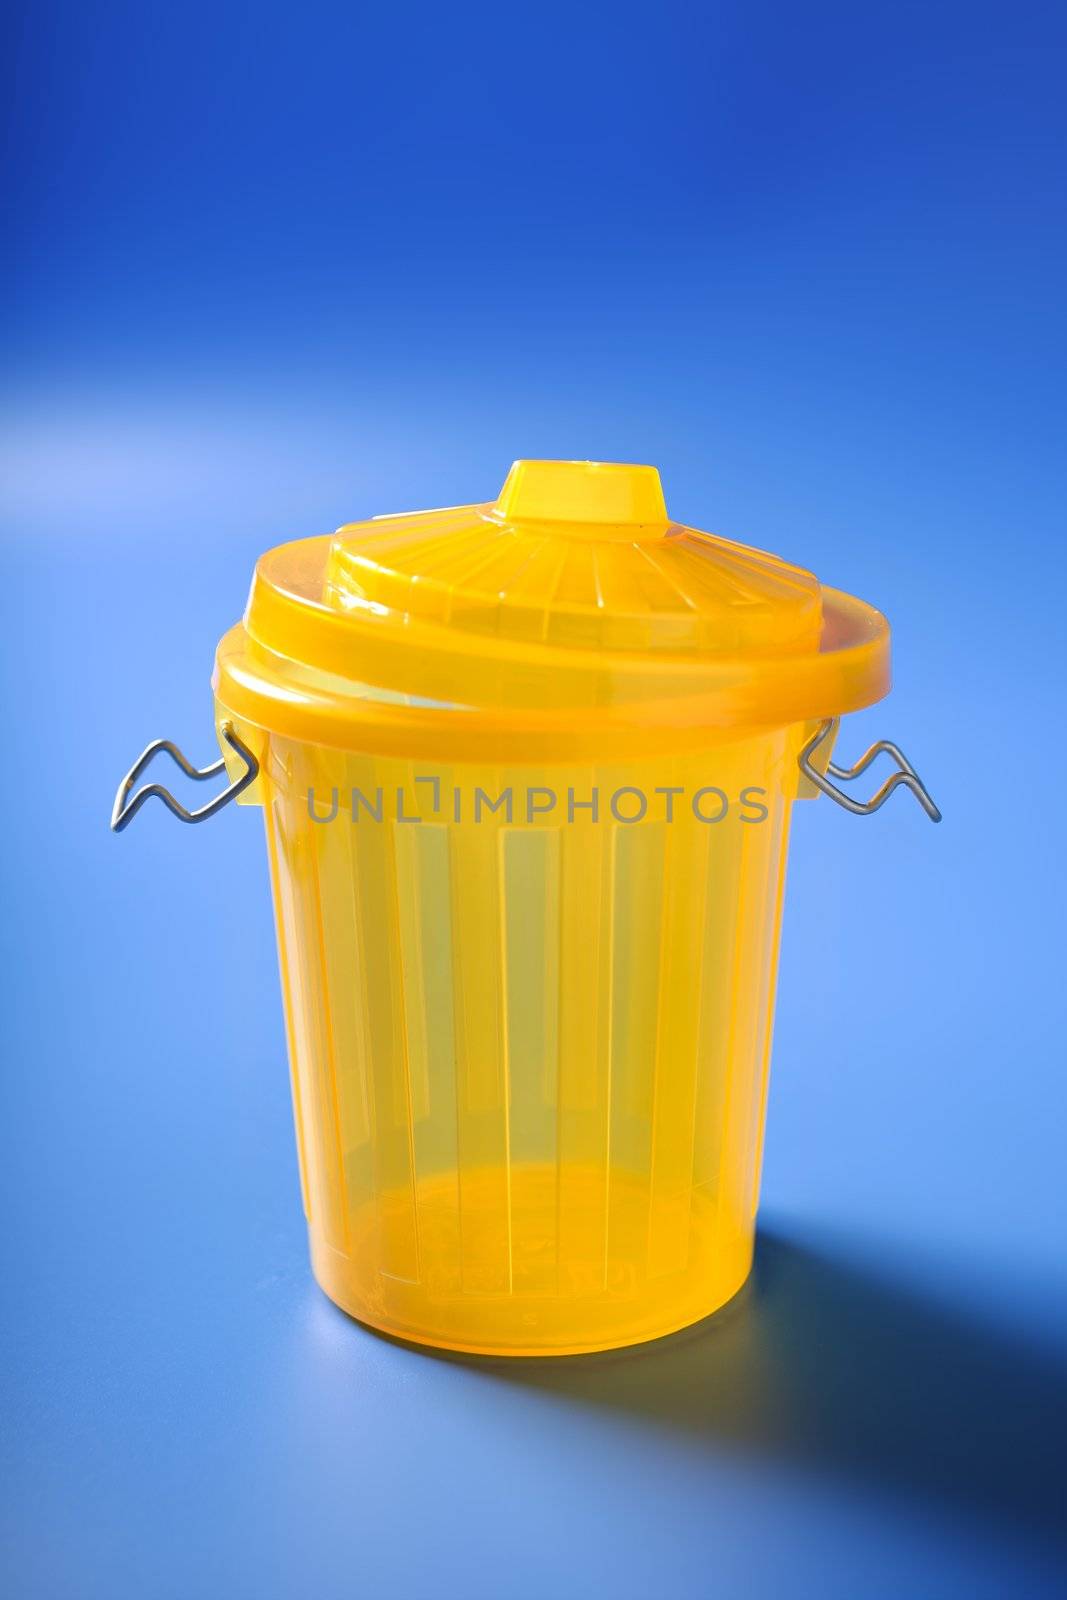 Yellow trash dustbin over blue background with shadows